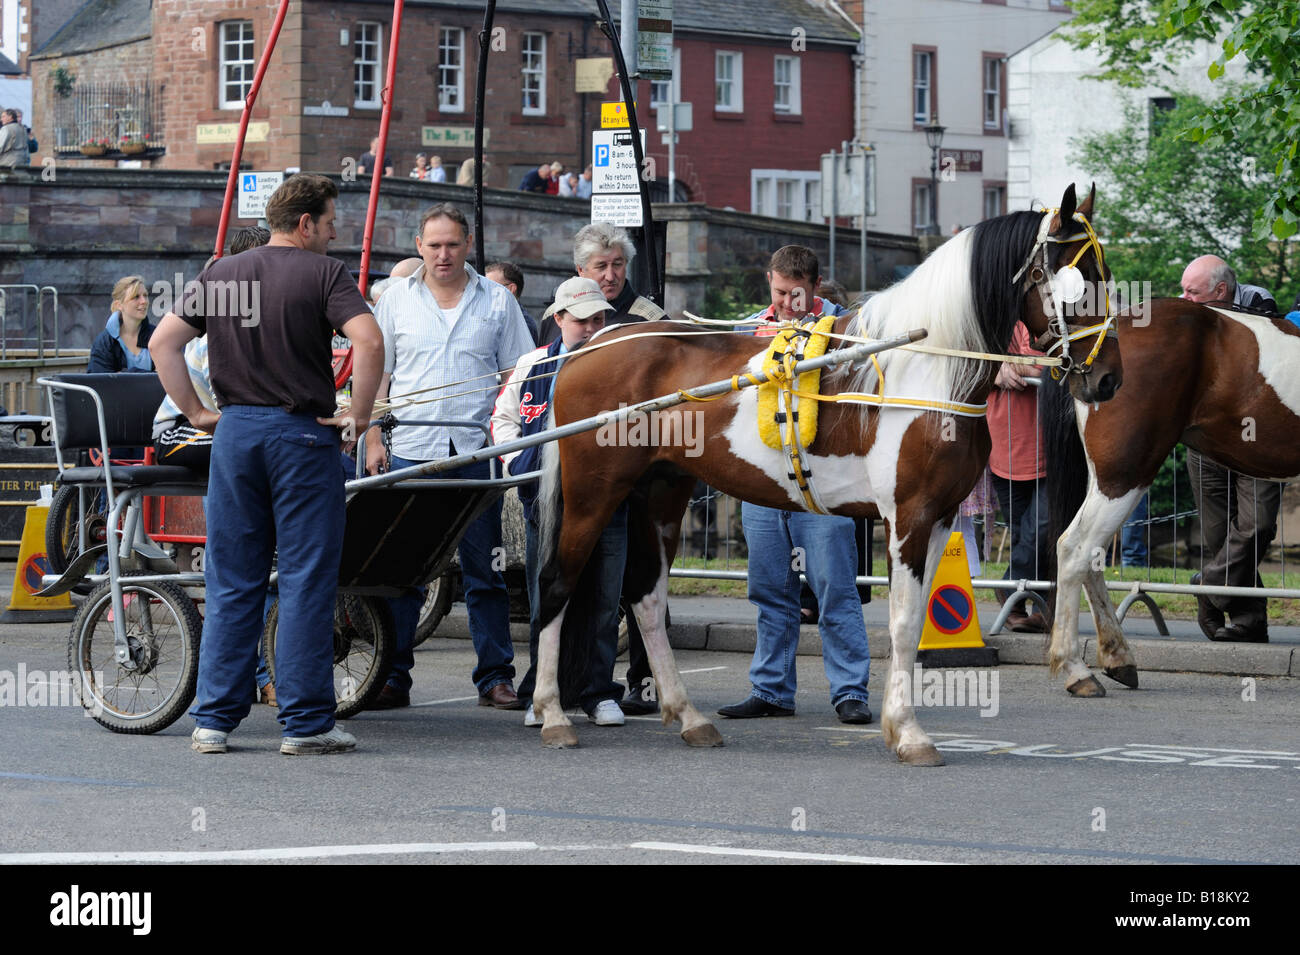 Gypsy traveller horse dealers at Appleby Horse Fair. Appleby-in-Westmorland, Cumbria, England, United Kingdom, Europe. Stock Photo